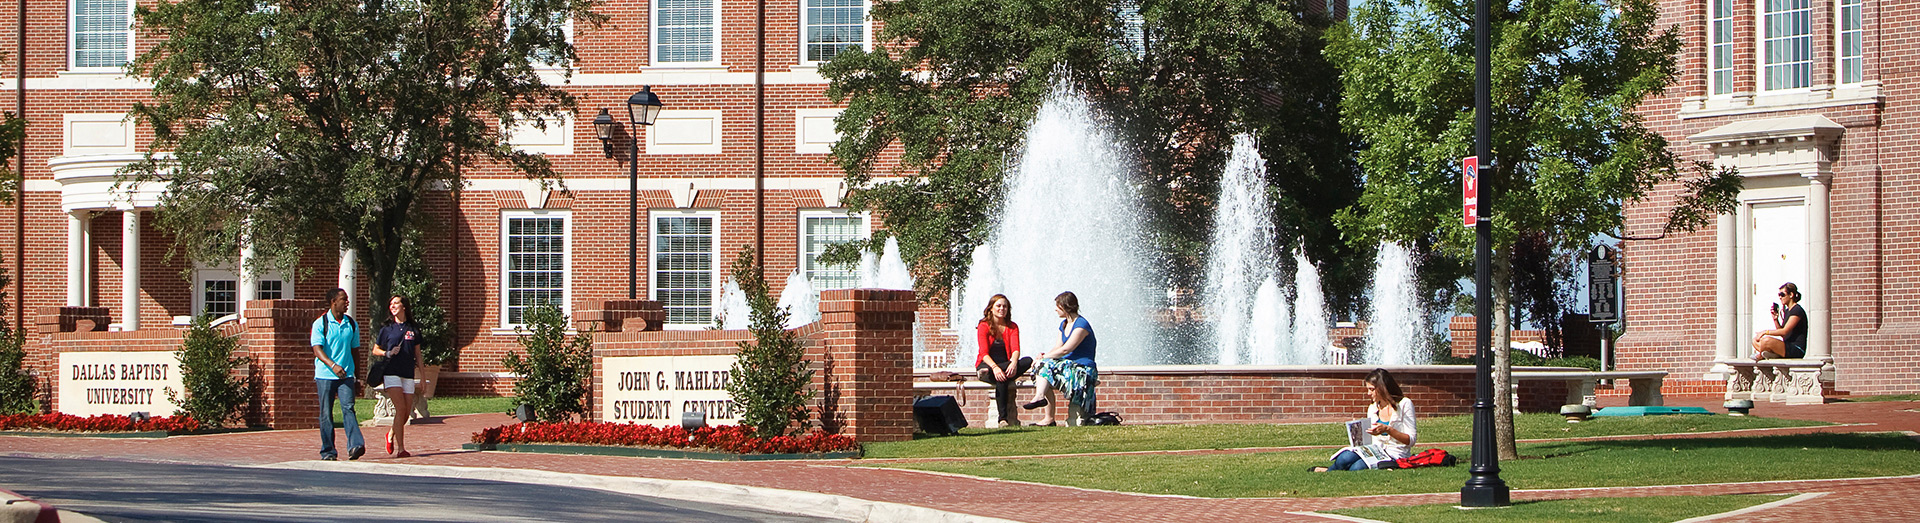 Campus life in front of the Mahler Fountain